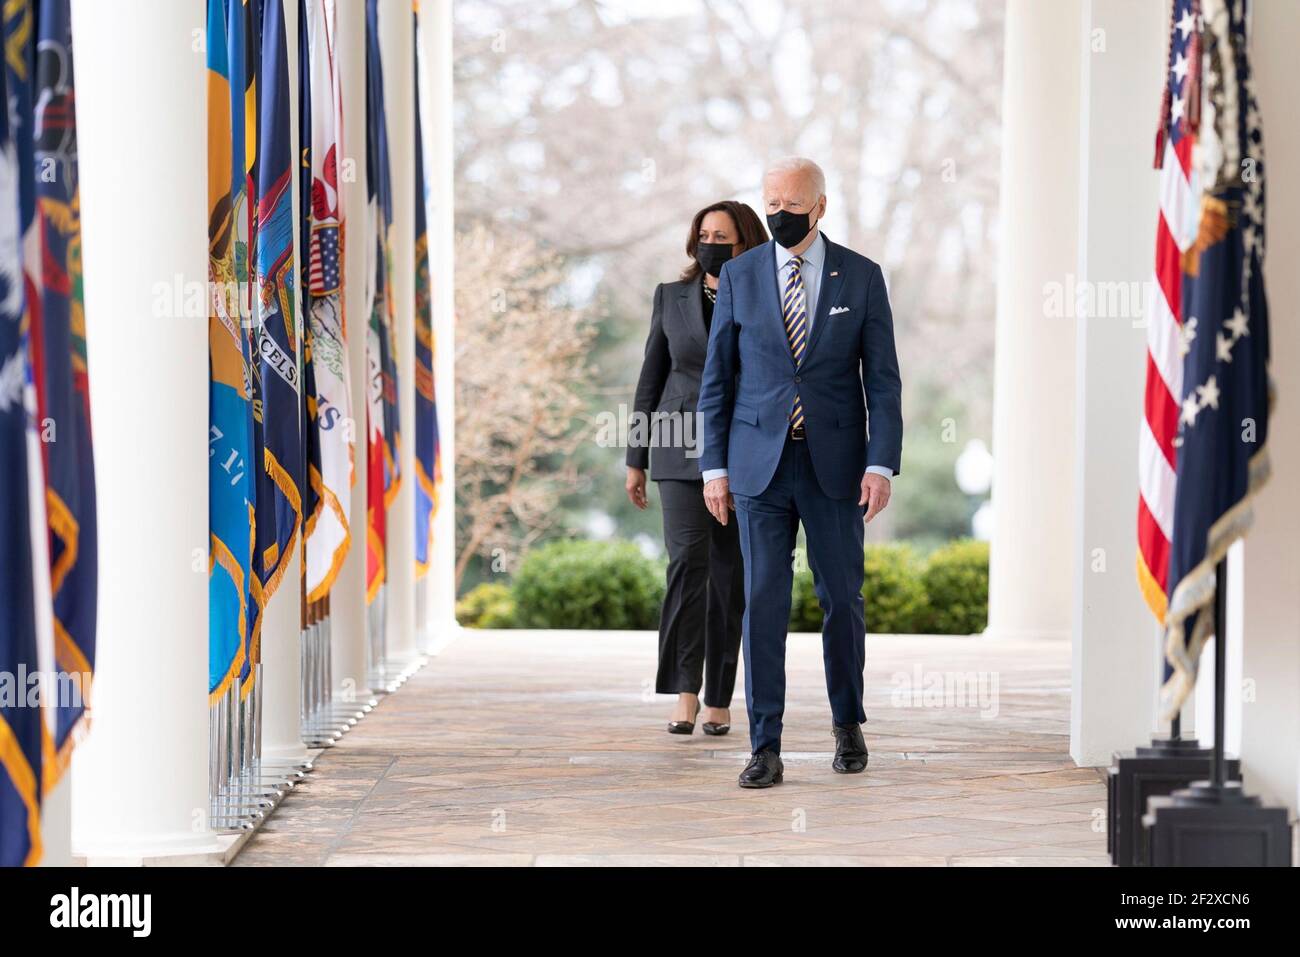 Washington, United States Of America. 12th Mar, 2021. U.S President Joe Biden and Vice President Kamala Harris, walk down the Colonnade on their way to announce the American Rescue Plan at the Rose Garden of the White House March 12, 2021 in Washington, DC Credit: Planetpix/Alamy Live News Stock Photo